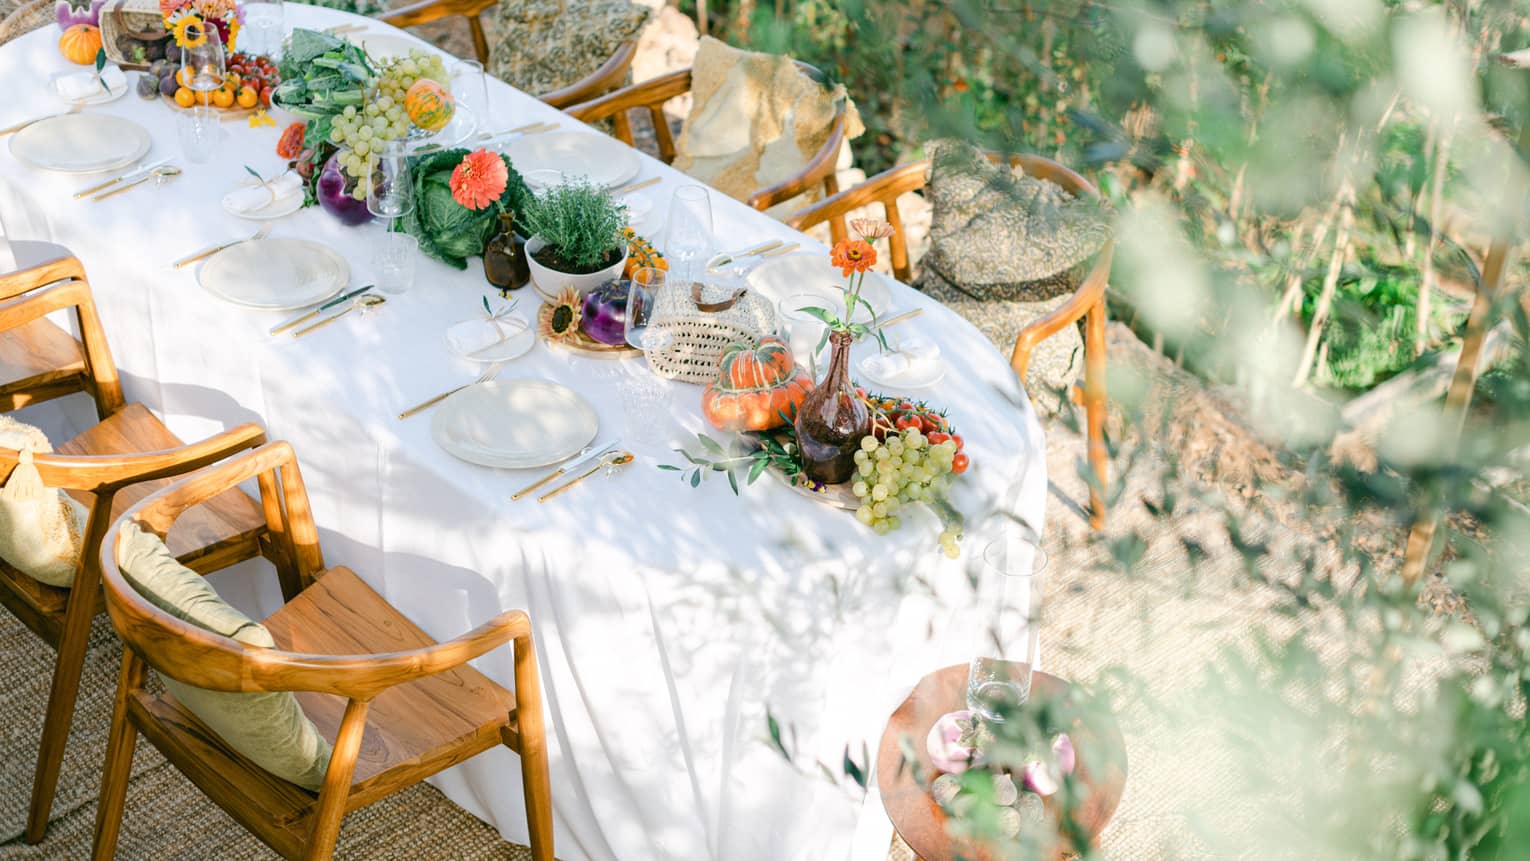 Aerial view of garden dining setup with oval table draped in white and garden bounty down centre